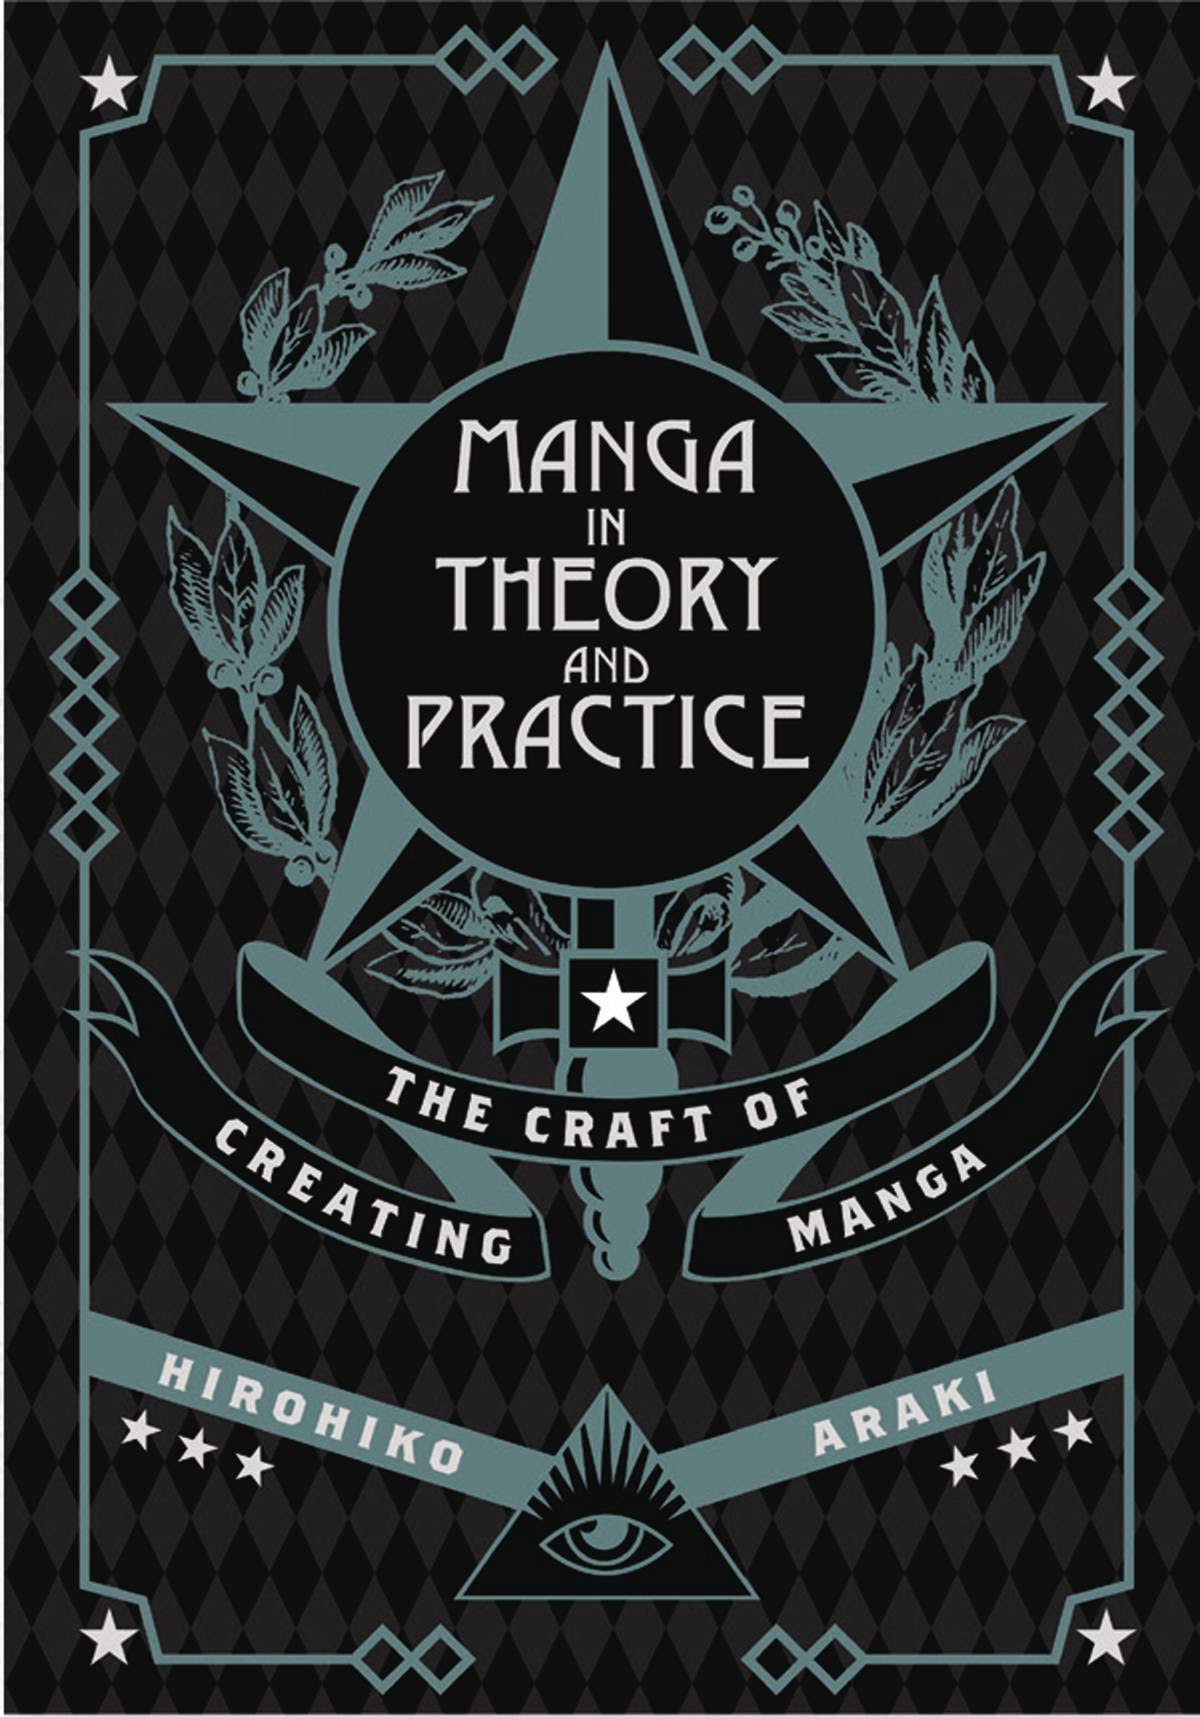 Manga in Theory and Practice: The Craft of Creating Manga [Book]